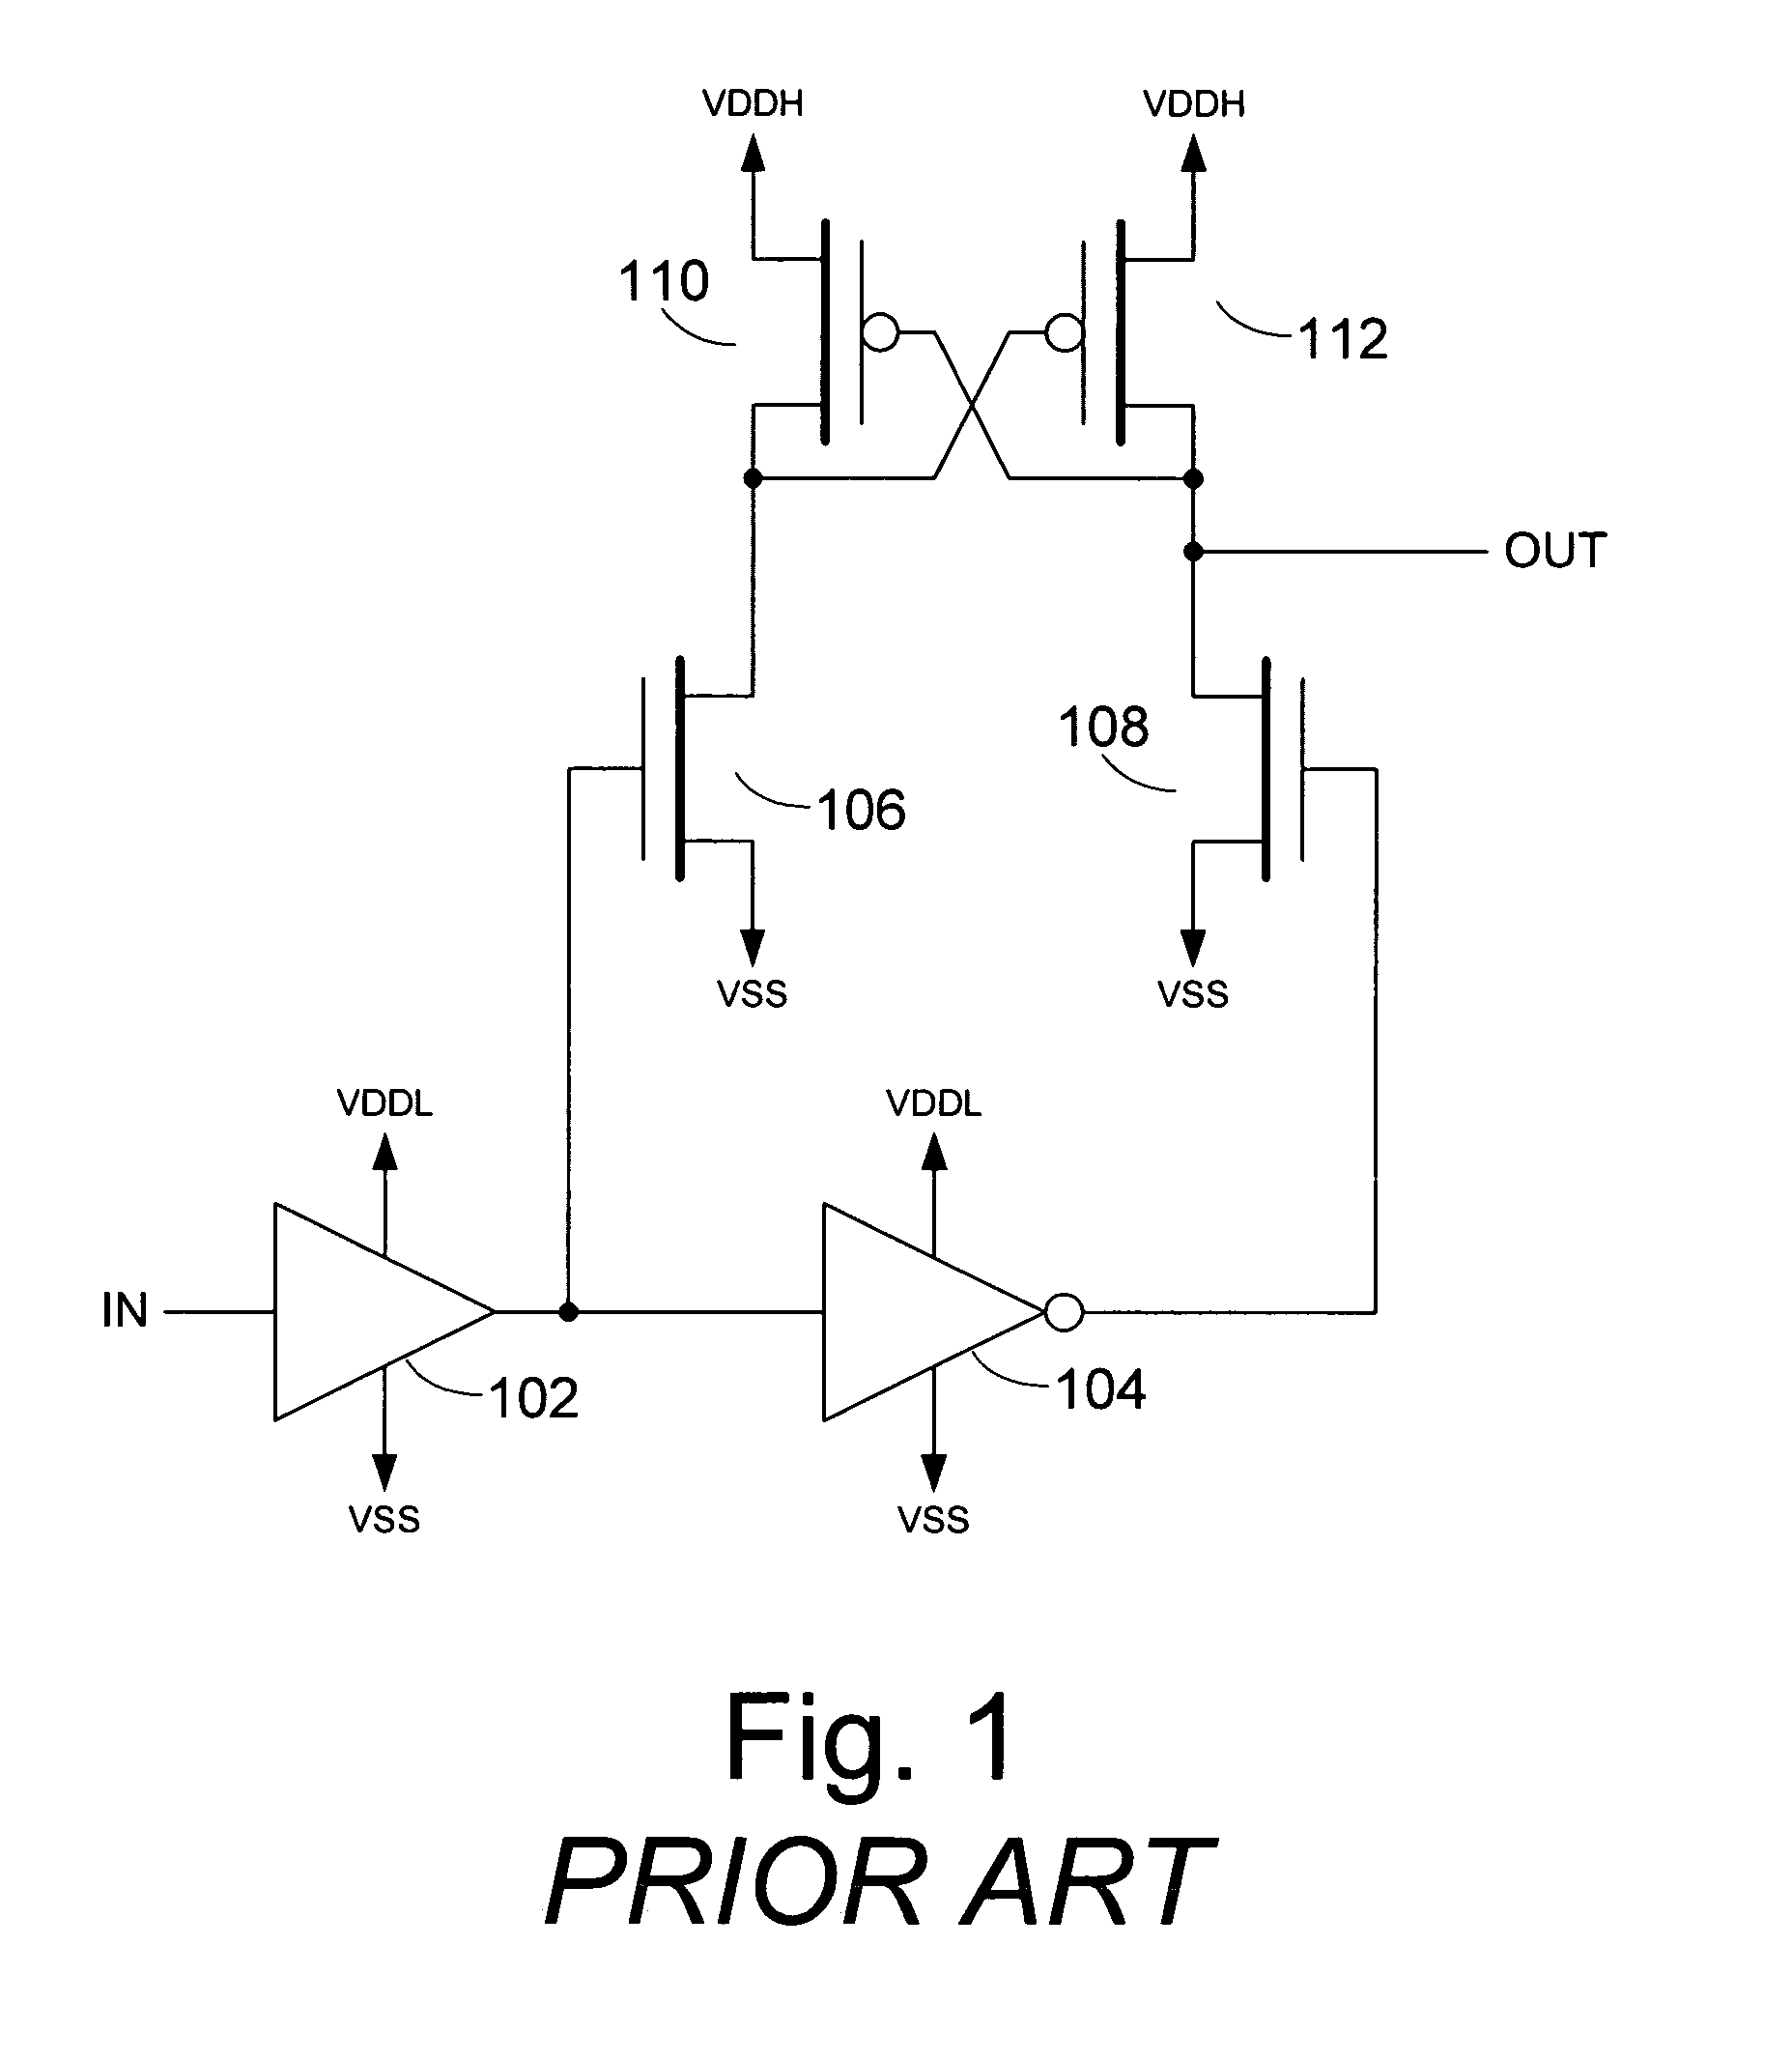 Systems and methods for translation of signal levels across voltage domains